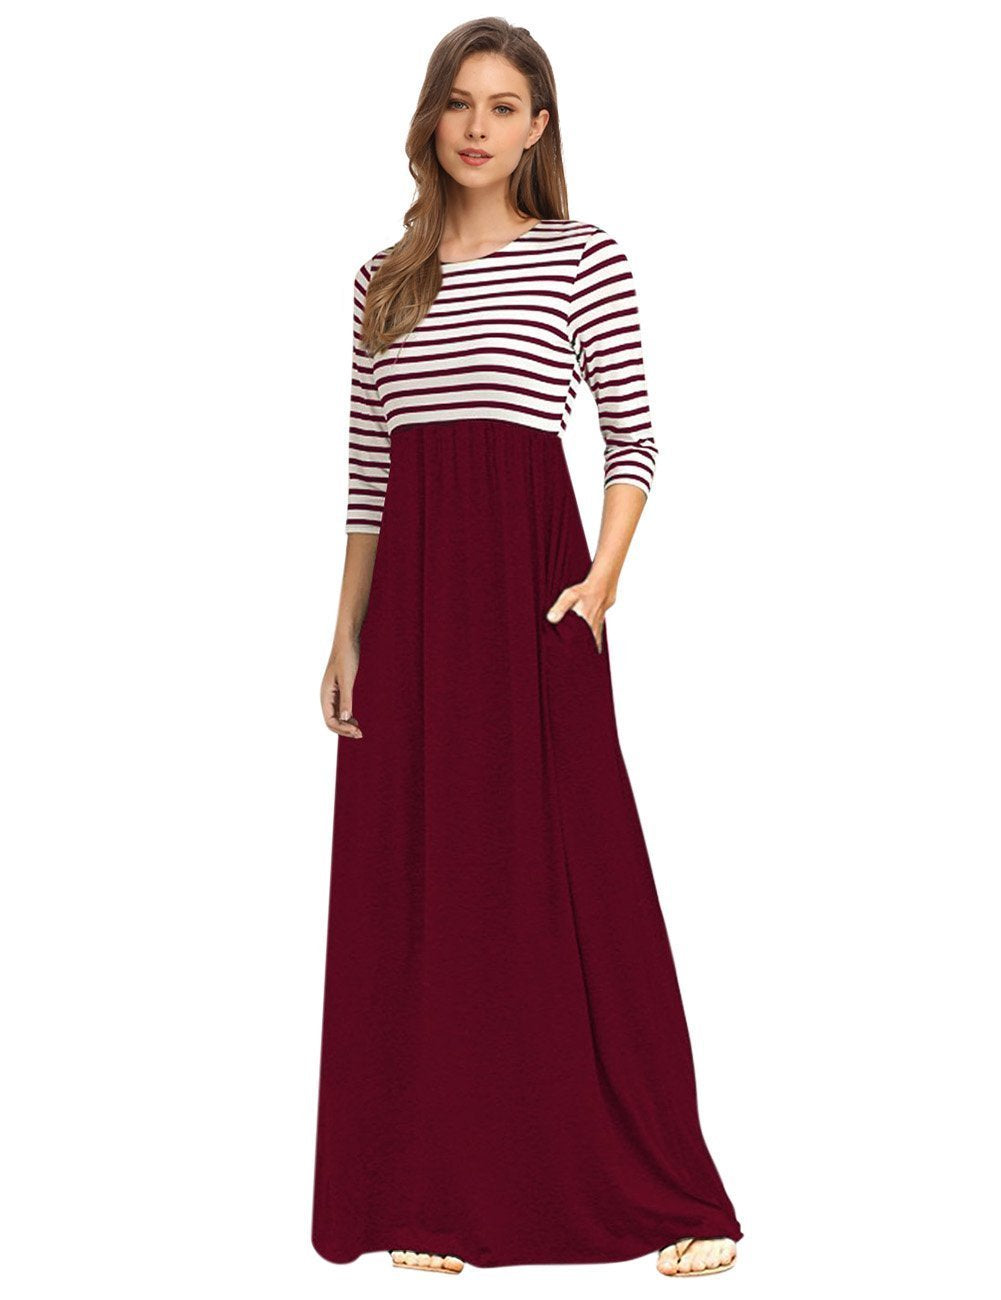 Women's Striped Round Neck 3/4 Sleeve Casual Long Maxi Dress with Side Pockets